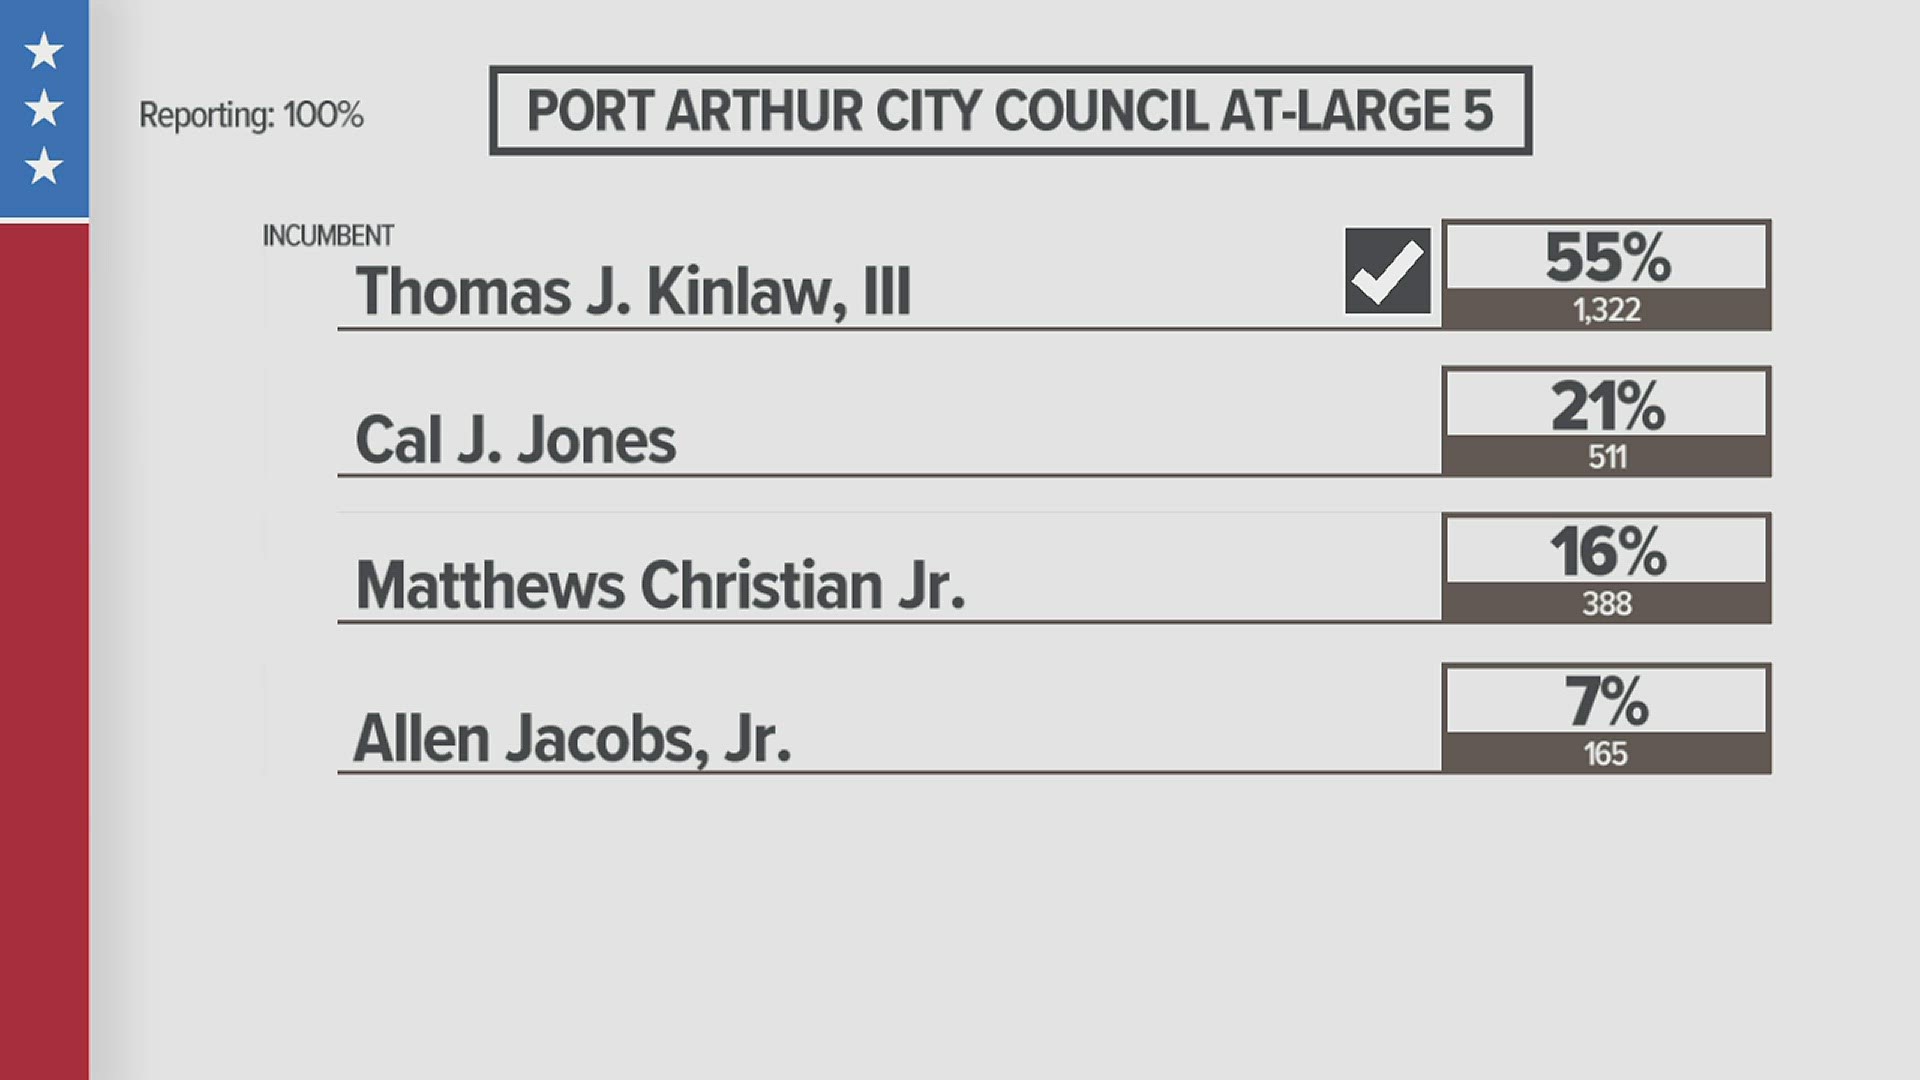 Kinlaw beat three other candidates after gaining 55% of the vote.